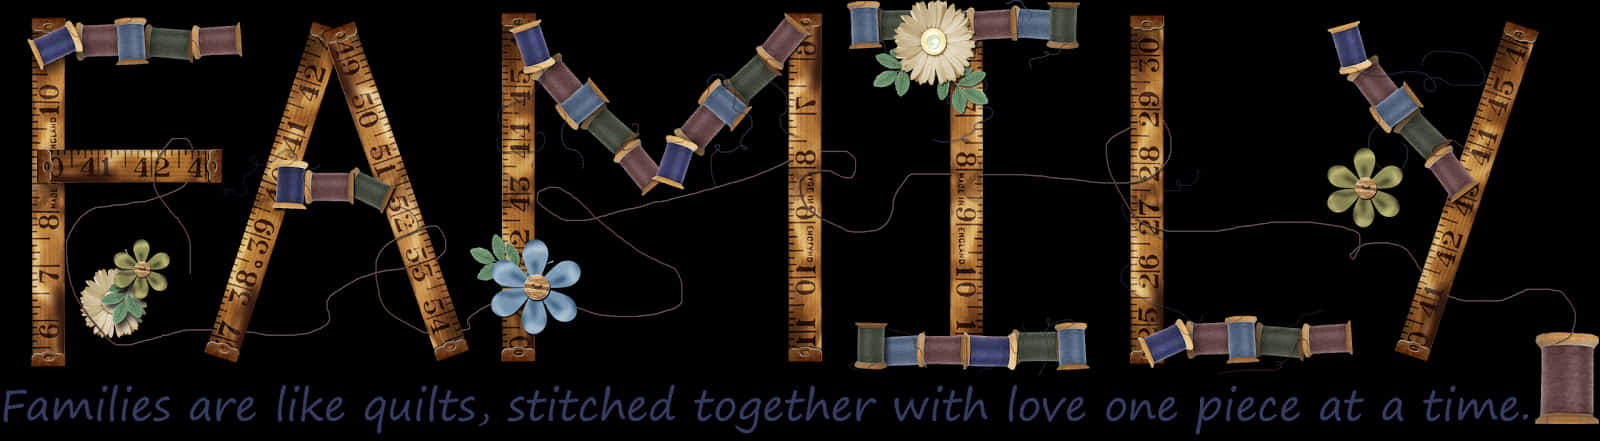 Family Quilt Inspirational Quote PNG image